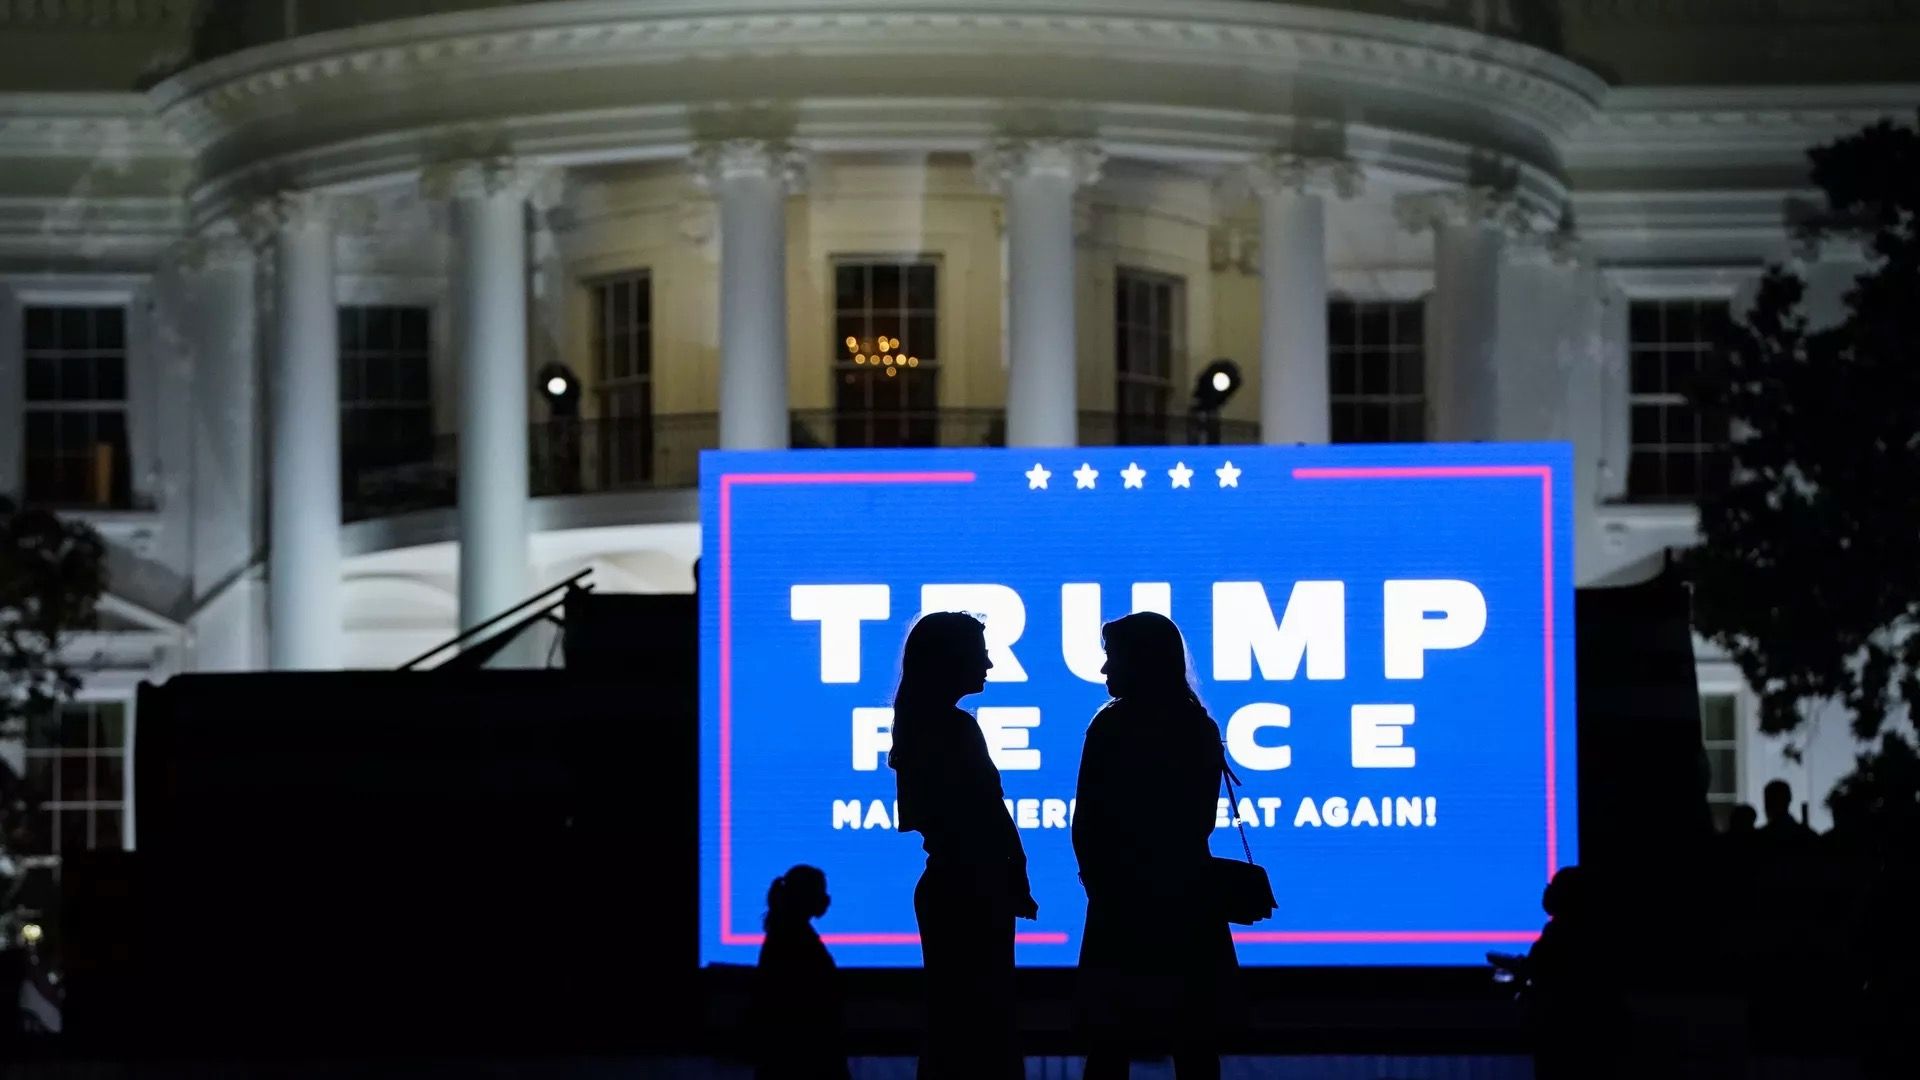 Two women are seen in silhouette standing in front of a Trump-Pence campign sign on the White House lawn.